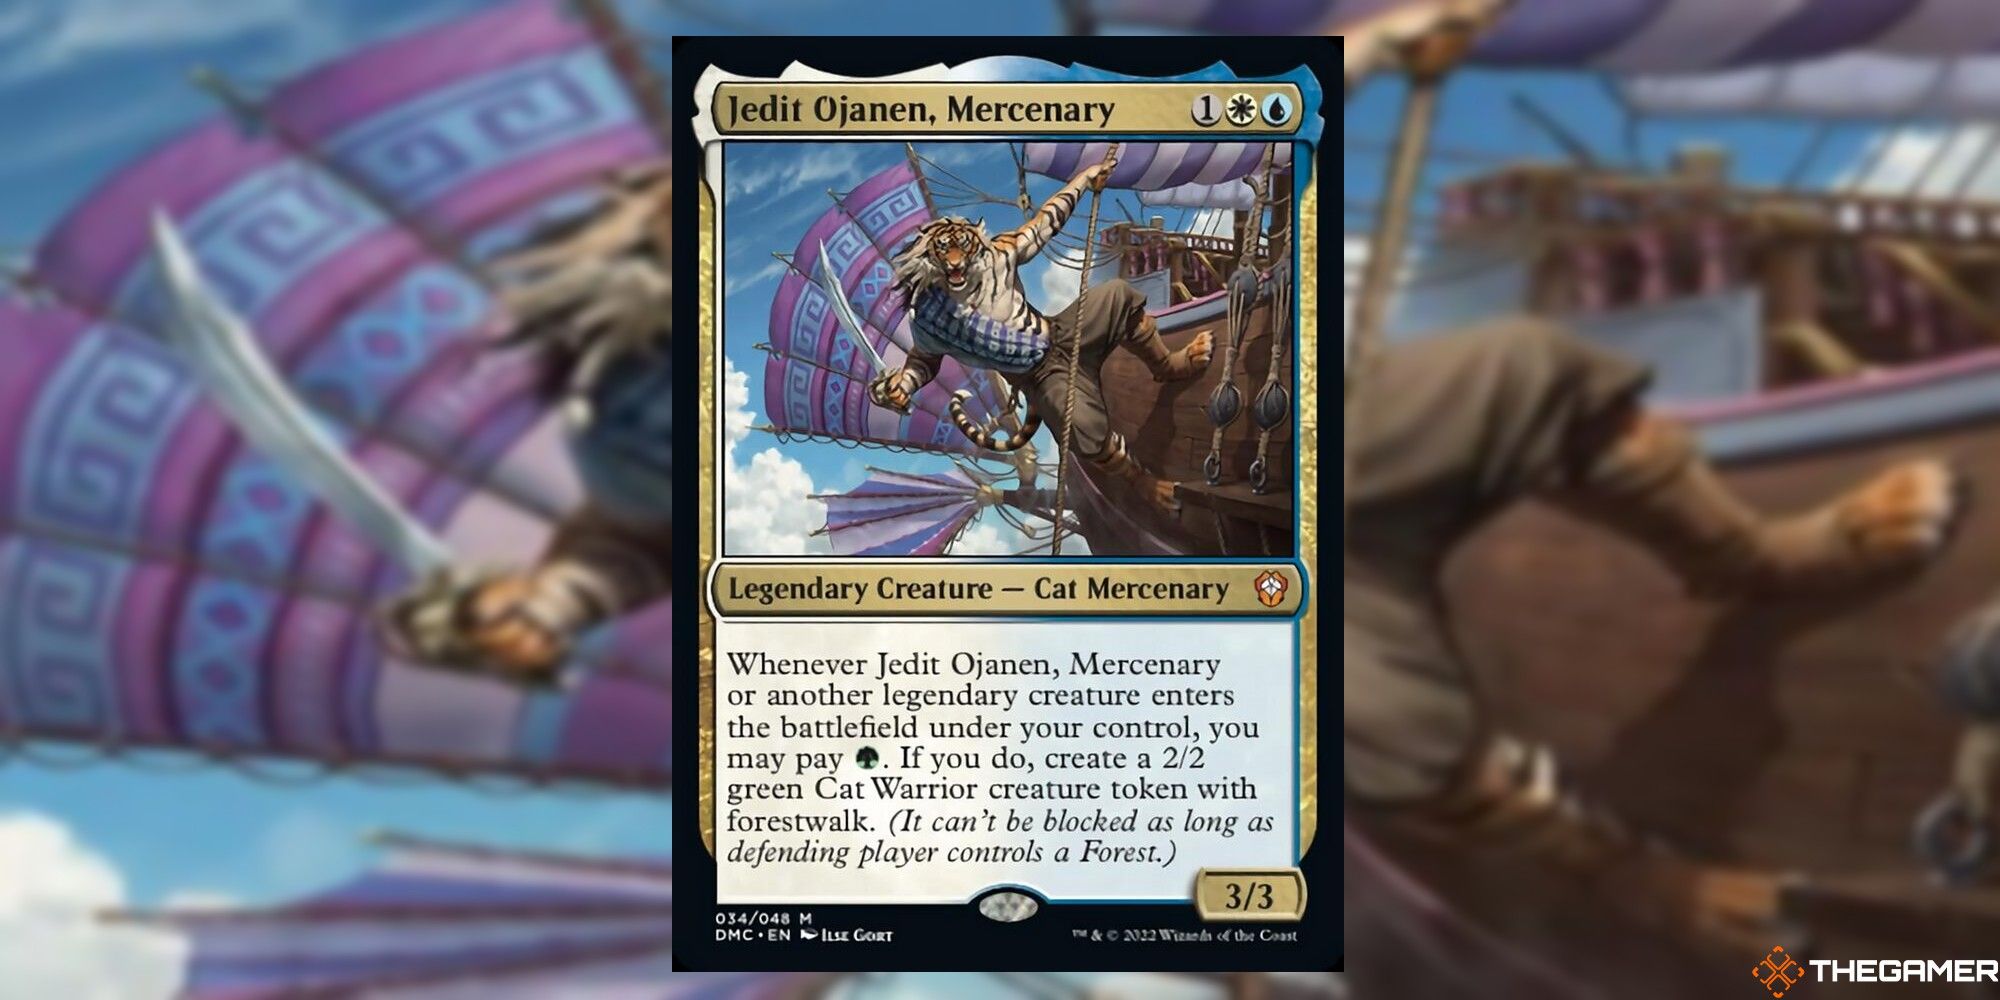 Image of the jedit ojanen, mercenary card in Magic: The Gathering, with art by Ilse Gort